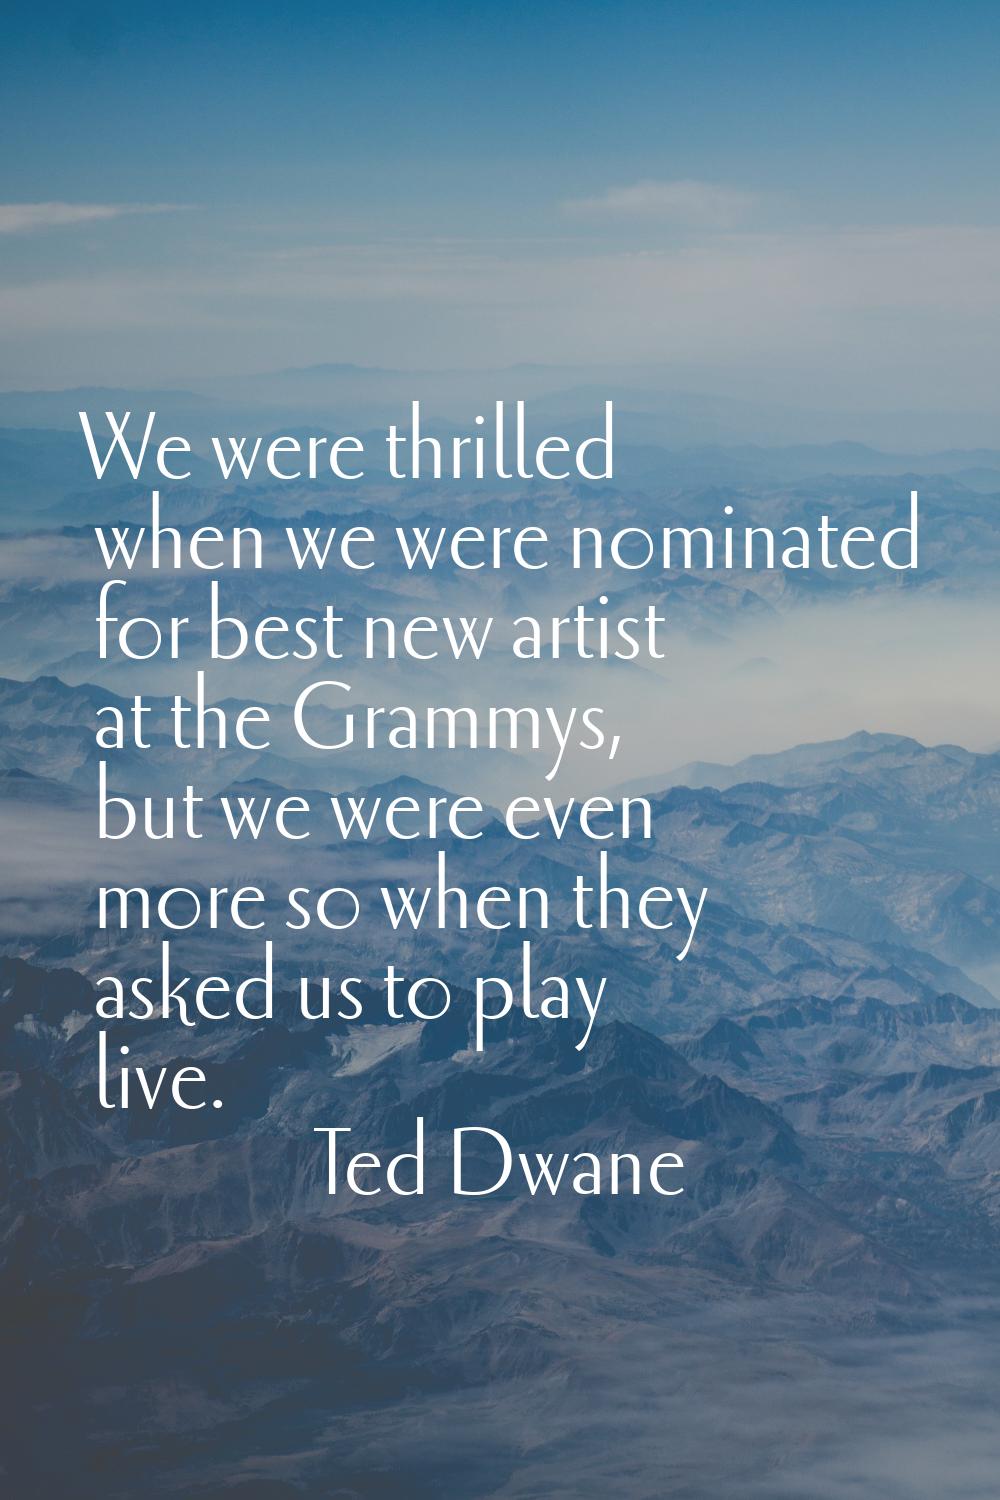 We were thrilled when we were nominated for best new artist at the Grammys, but we were even more s